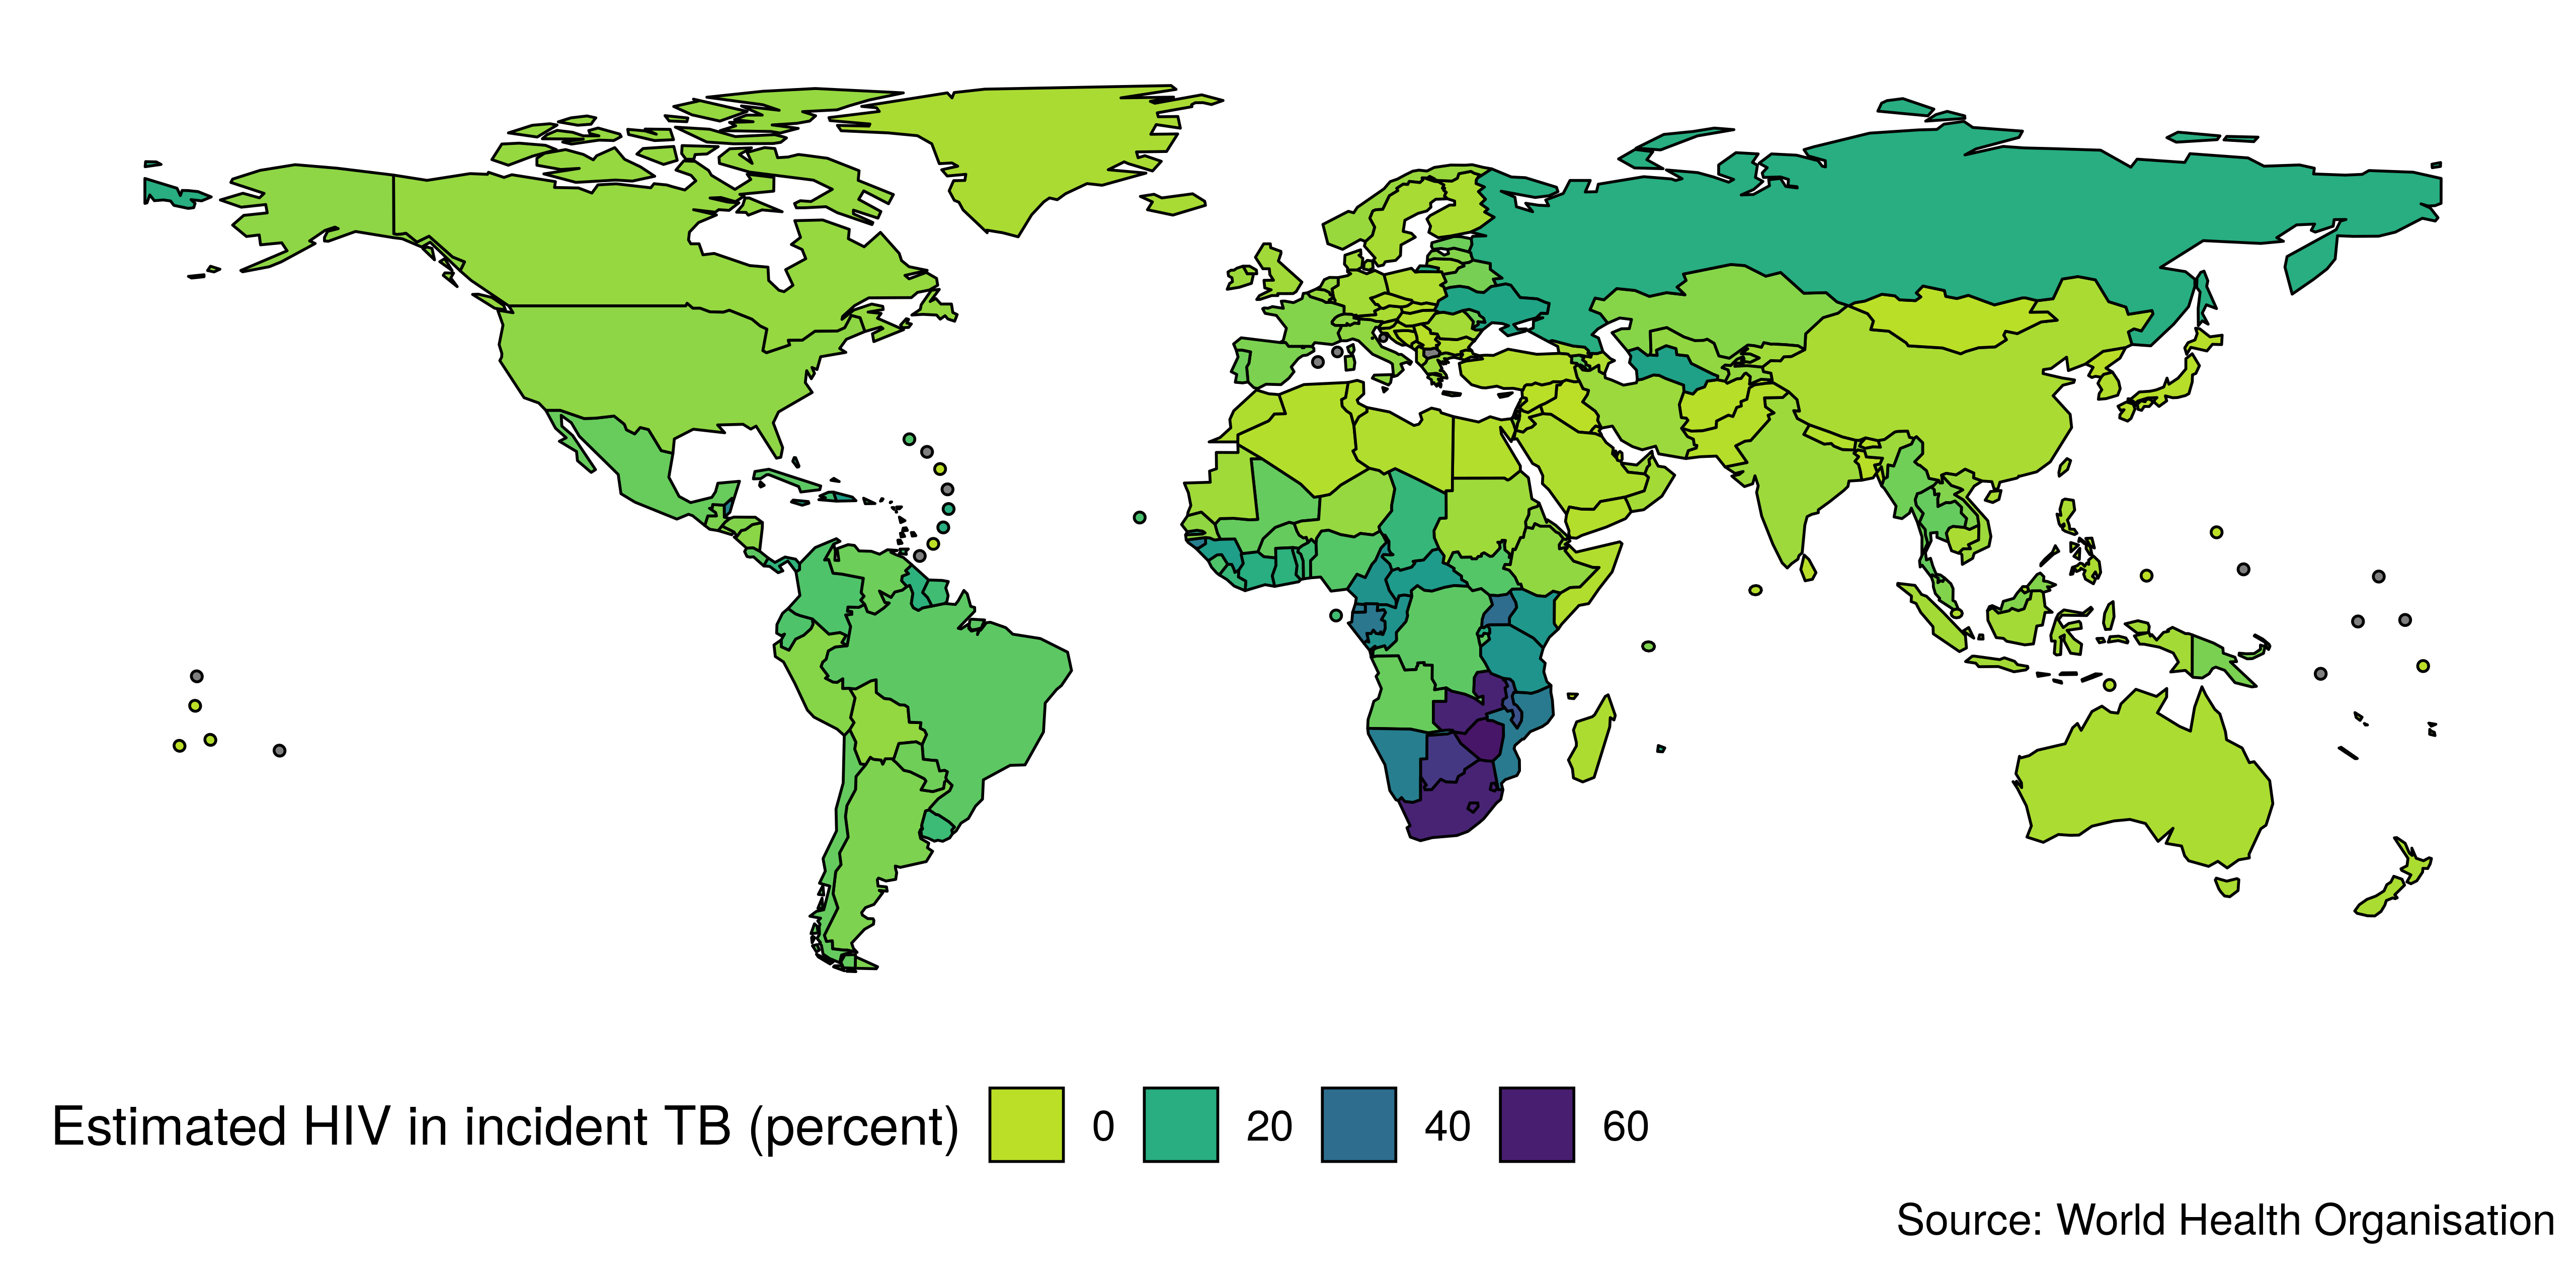 Global map of estimated HIV in incidence TB (percent) in 2018. Note the high percentage of TB cases with HIV in sub-saharan Africa. The percentages of HIV in incident TB in the legend refer to the lower bound for each colour.